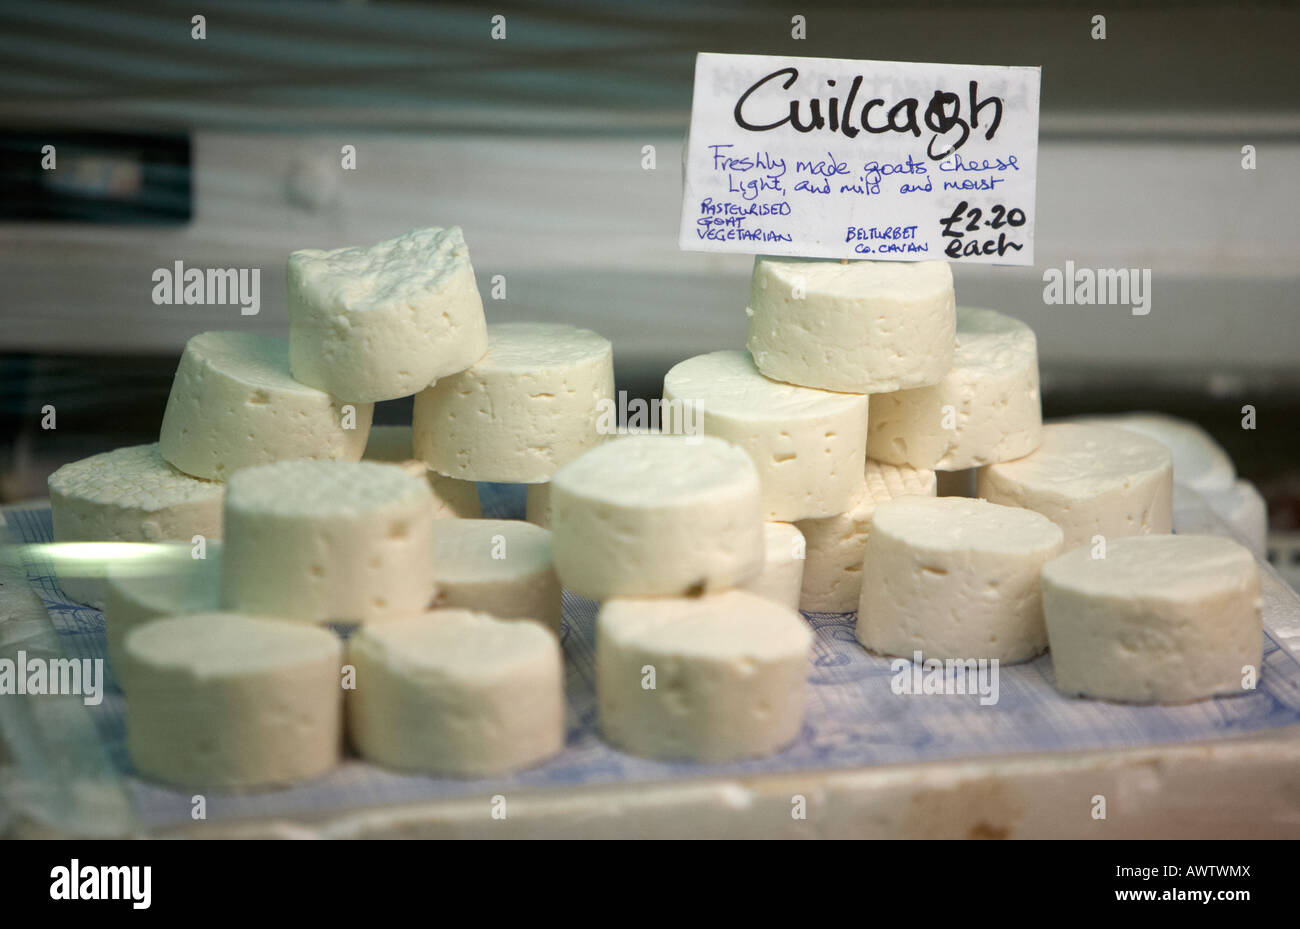 cuilcagh known also as corleggy freshly made irish goats cheese selection at an indoor market Stock Photo